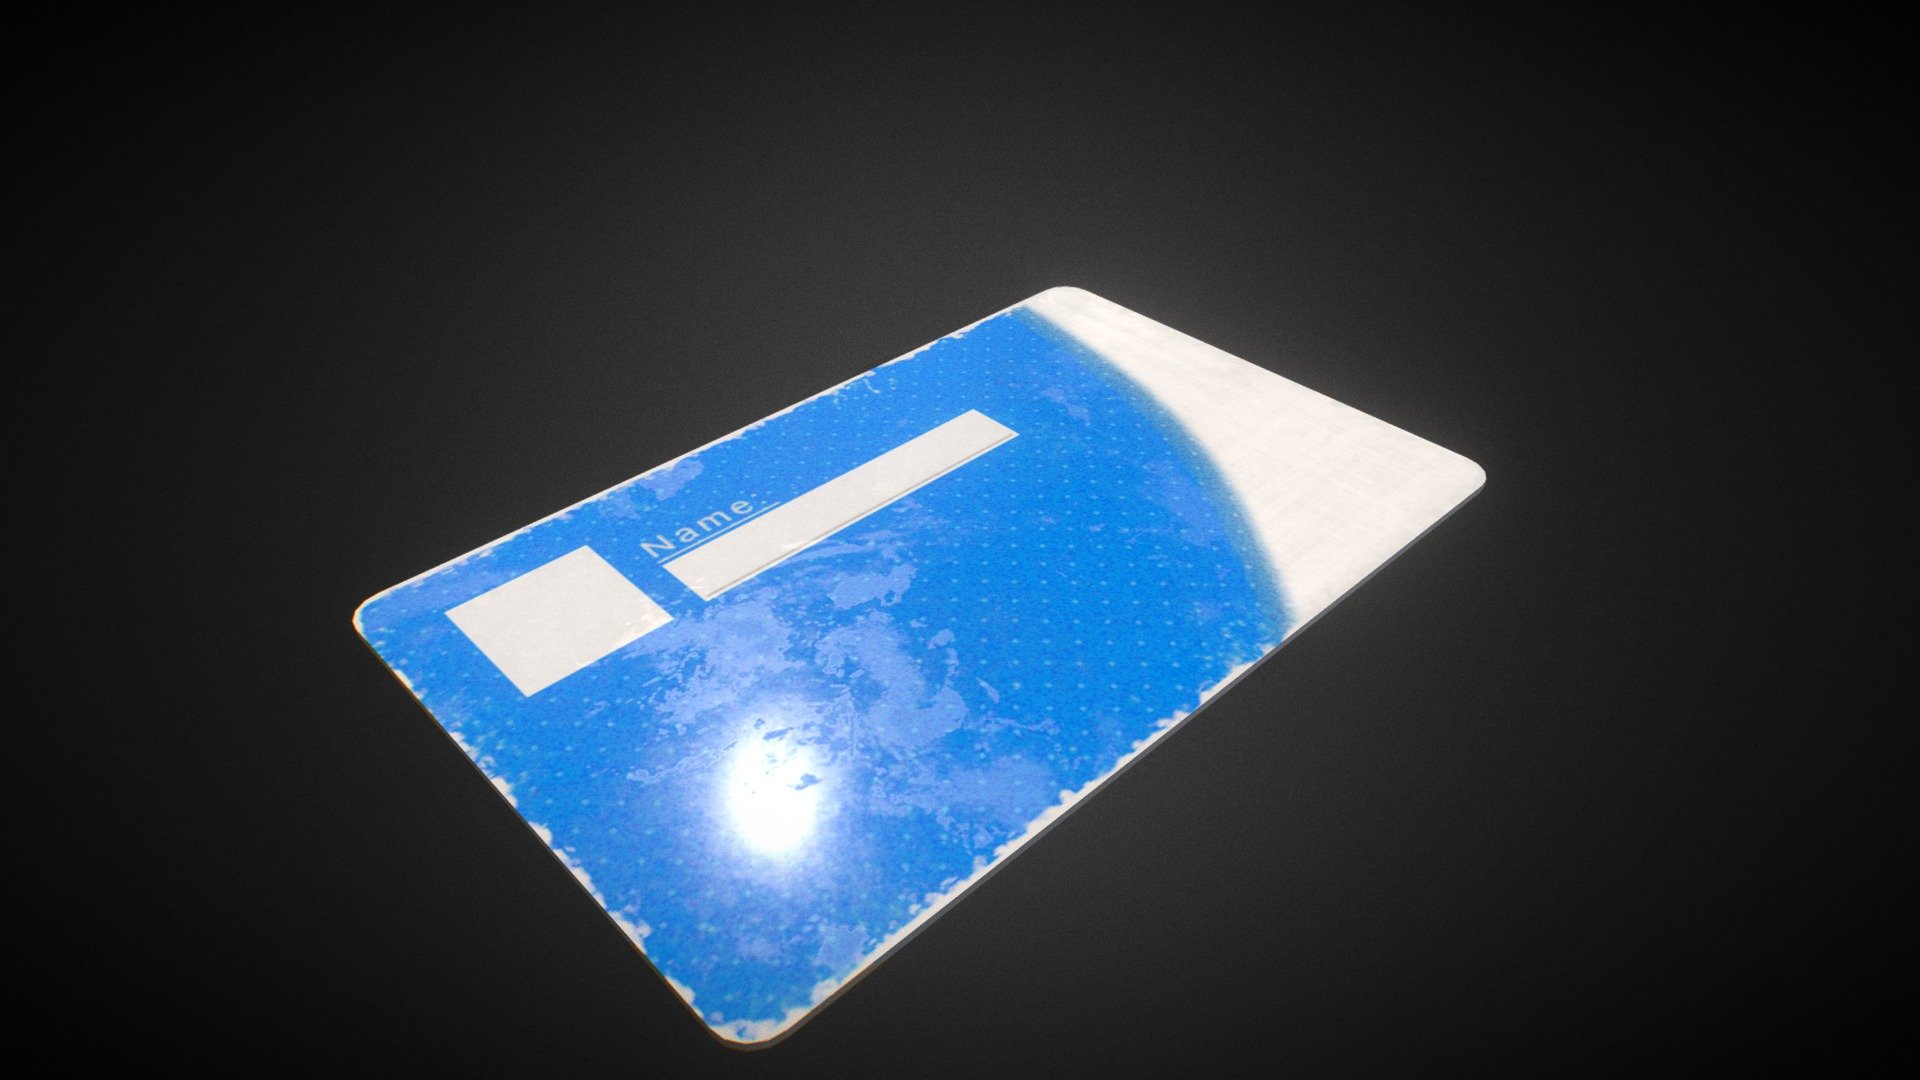 A simple keycard model&hellip; Made to test PBR 3d model